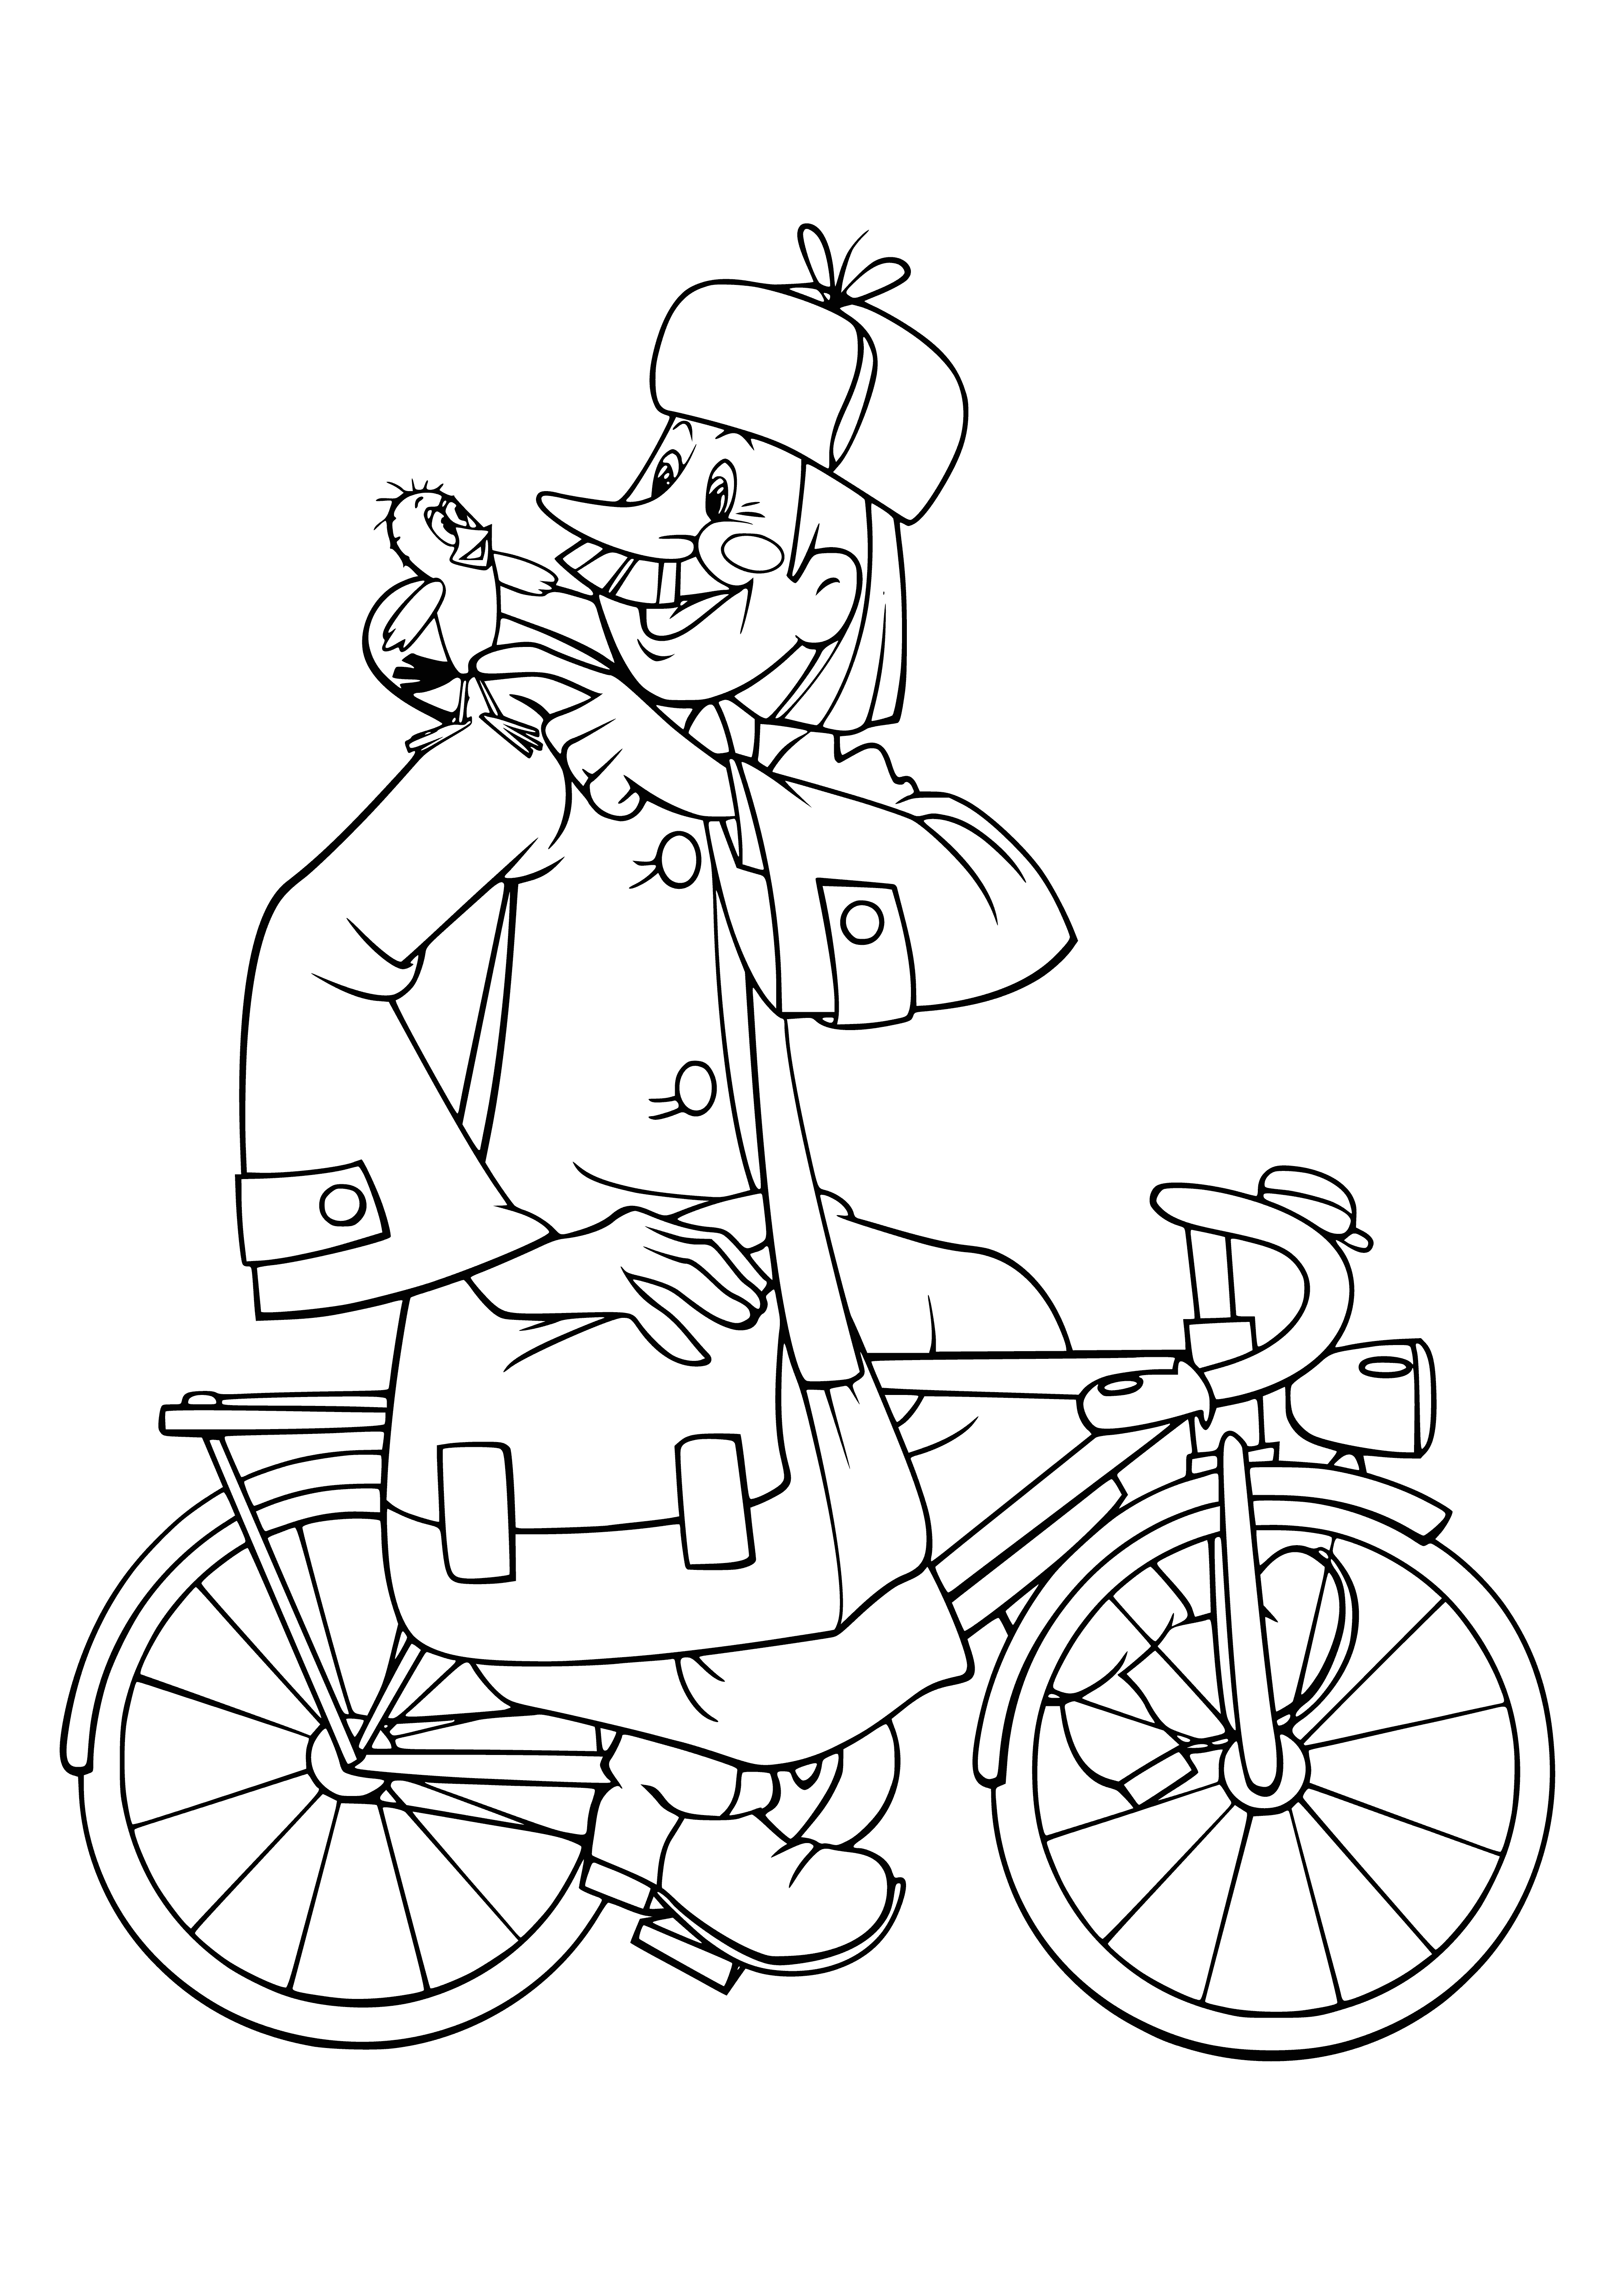 coloring page: Postman checks mailbox, dog looks on eagerly - both seem very happy.